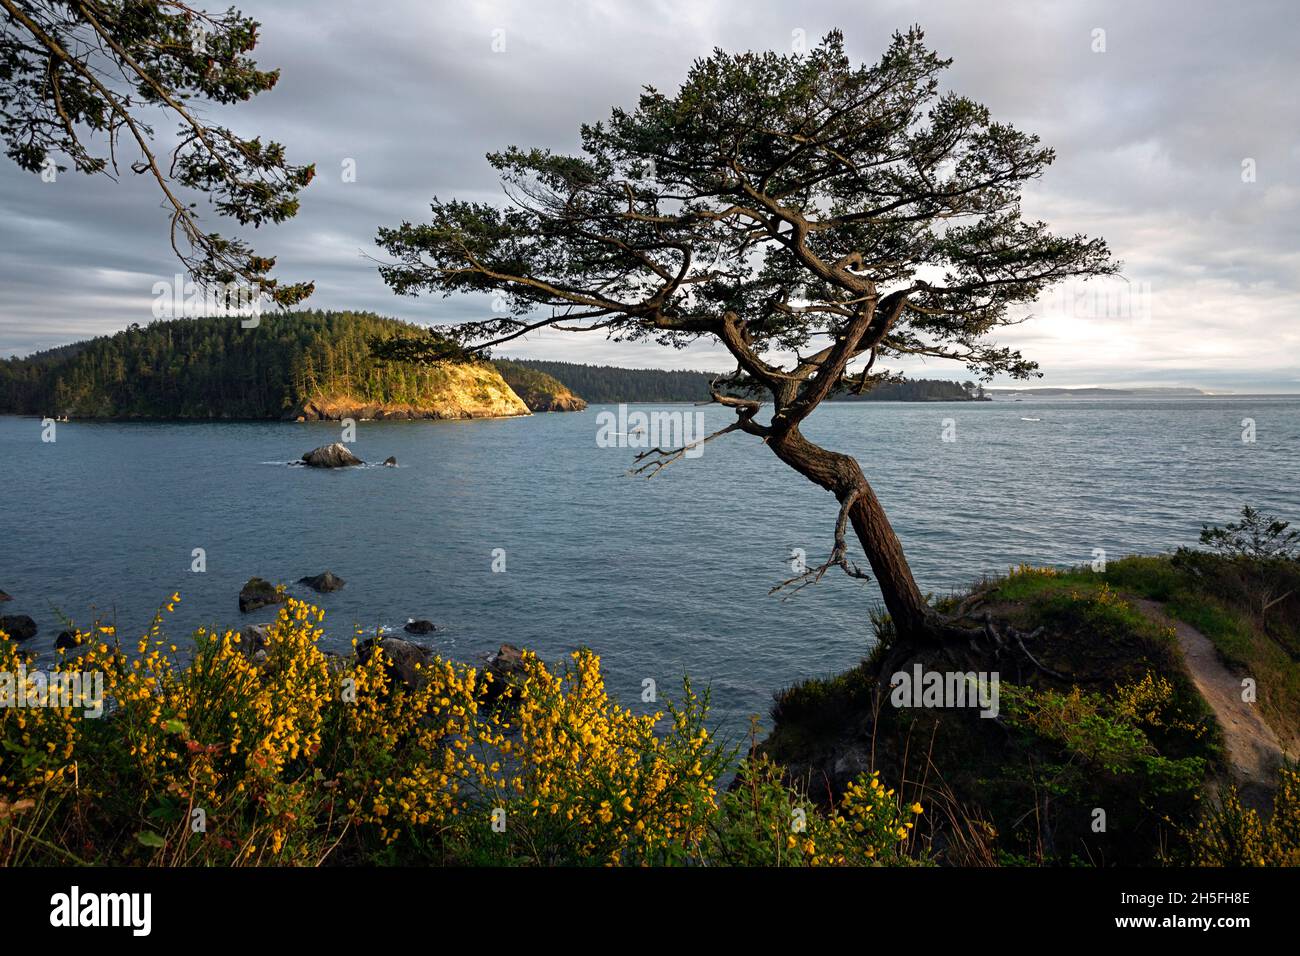 WA19743-00...WASHINGTON - A wind sculptured tree surrounded by scotch broom overlooking Bowman Bay and Rosario Strait in Deception Pass State Park. Stock Photo